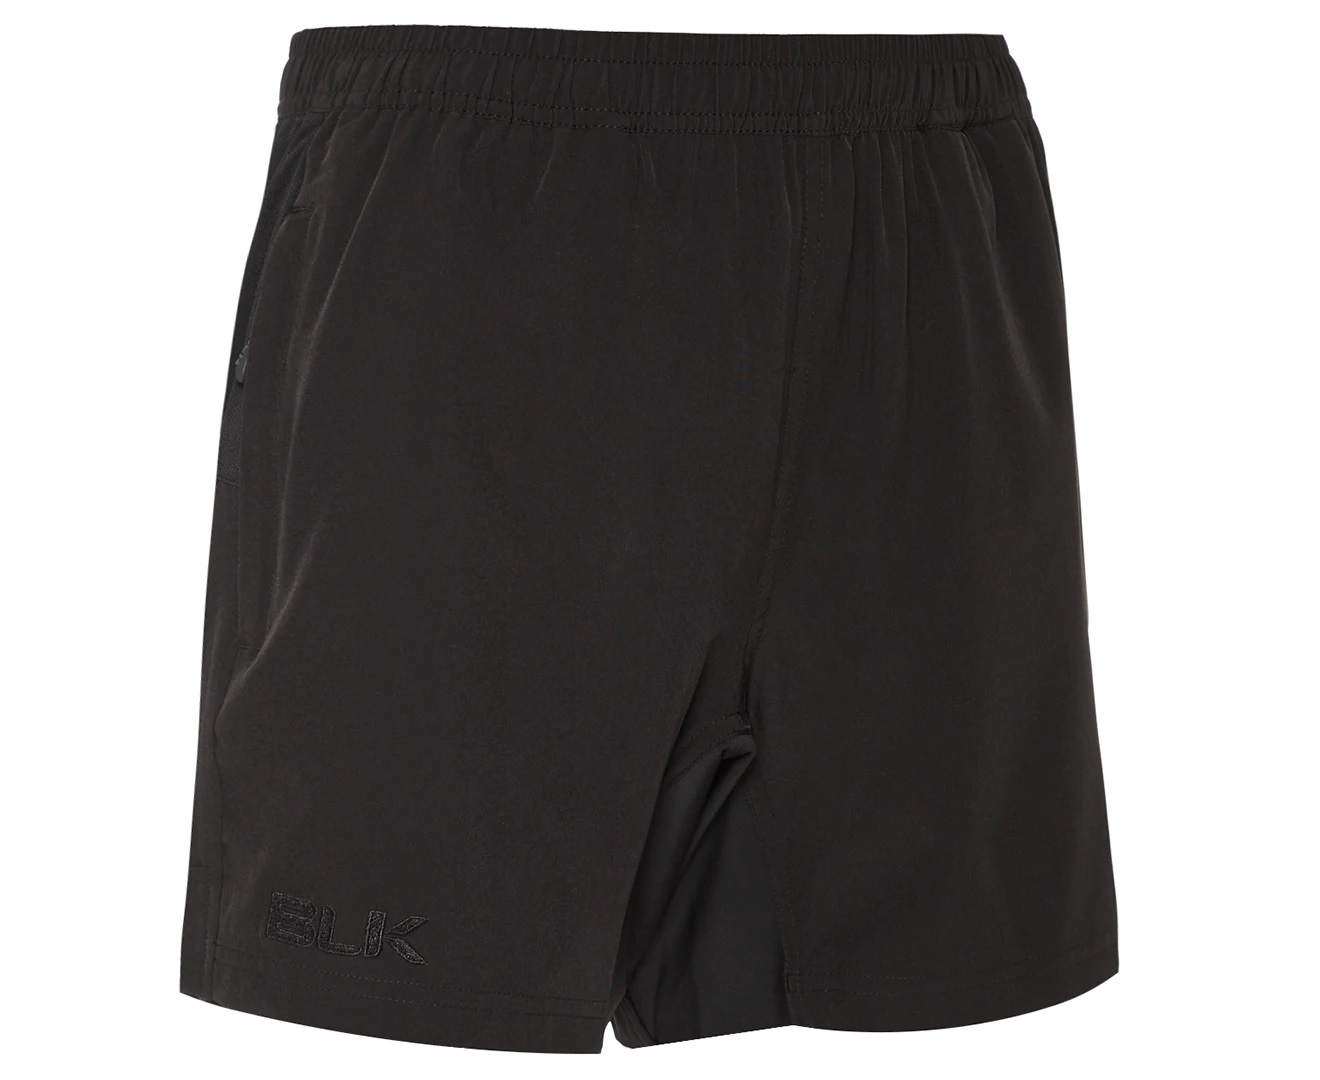 10 Superior 6″ Gym Shorts For 2023